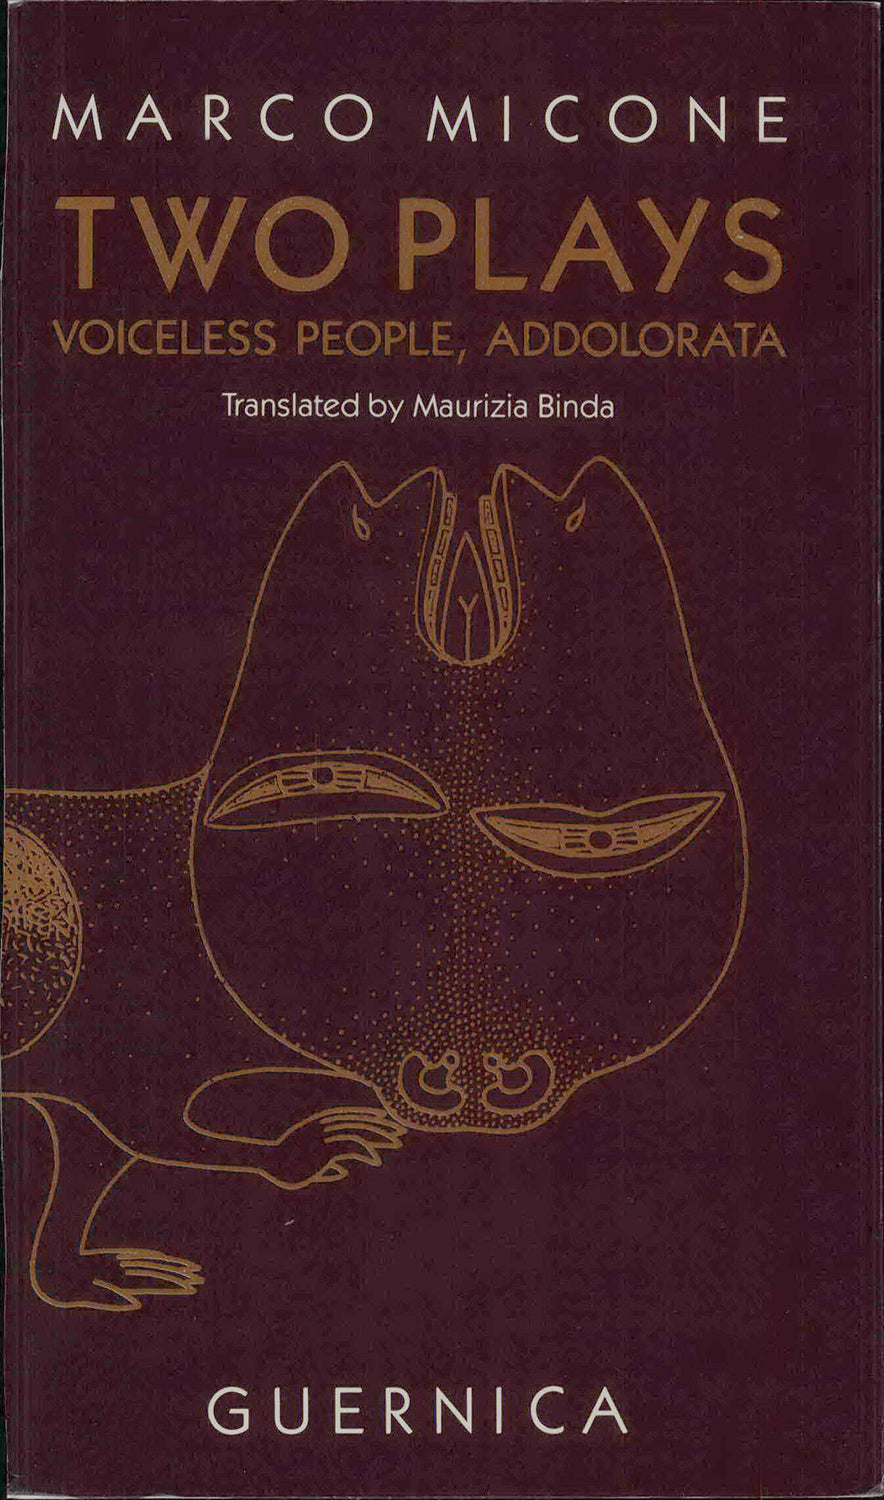 Voiceless People and Addolorata